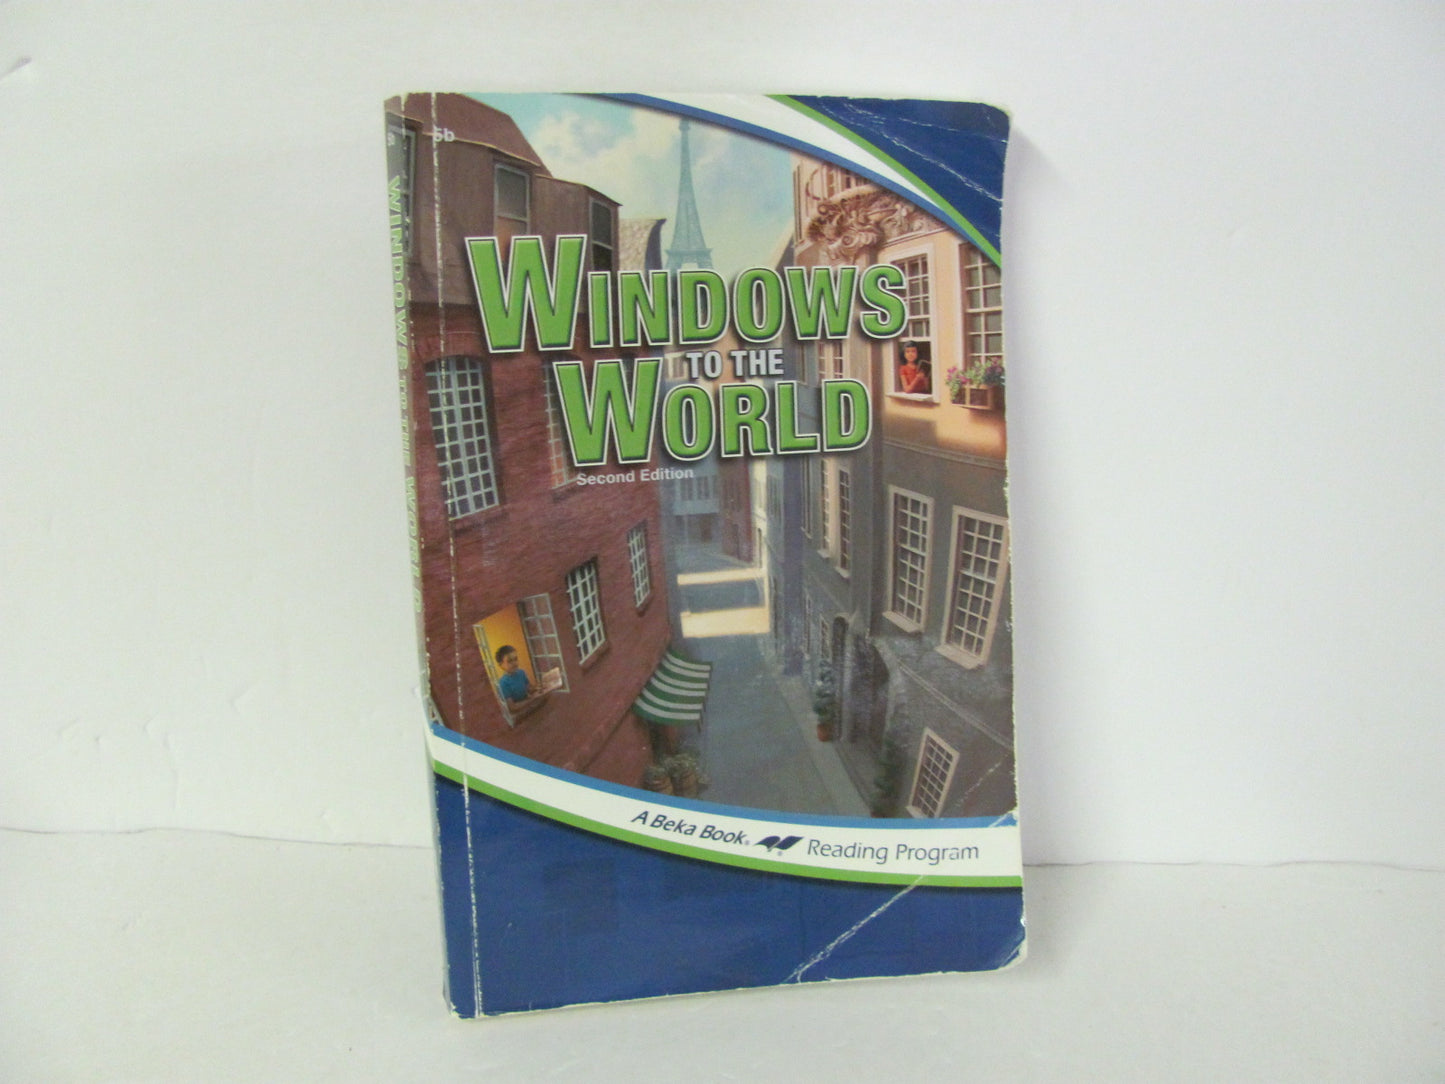 Windows to the World Abeka Student Book Gently Used 5th Grade Reading Textbooks